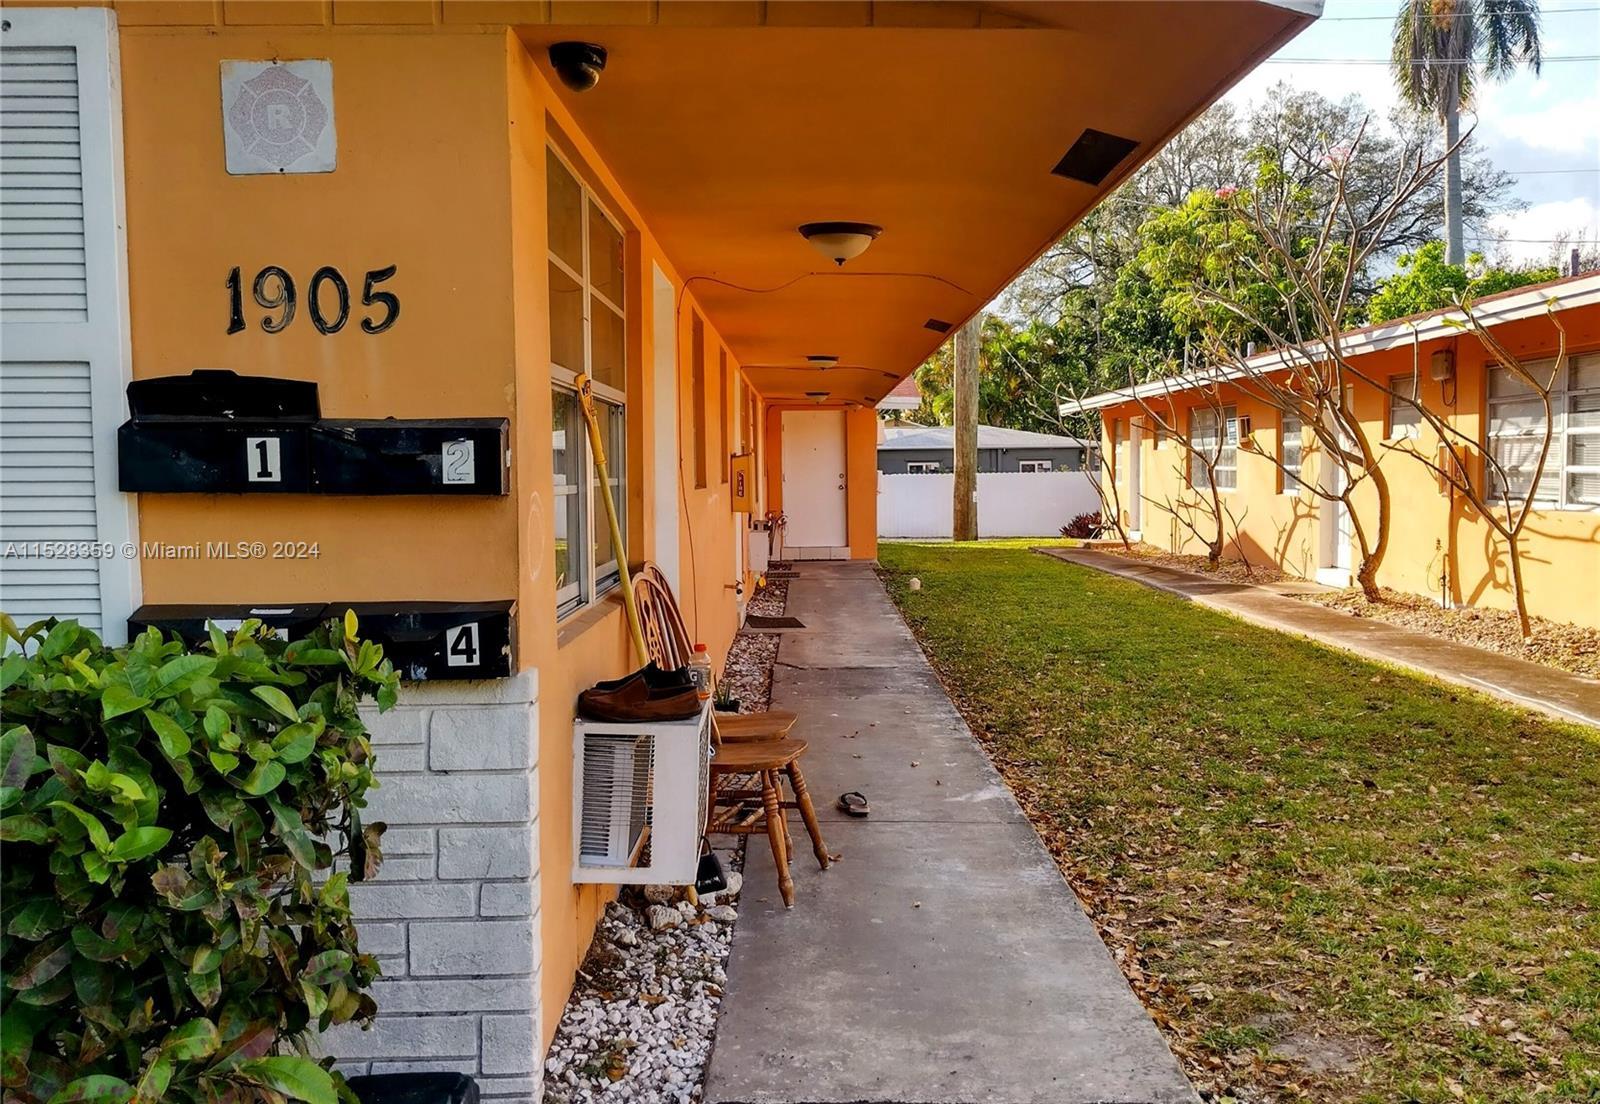 Photo of 1905 Miami Rd #2 in Fort Lauderdale, FL